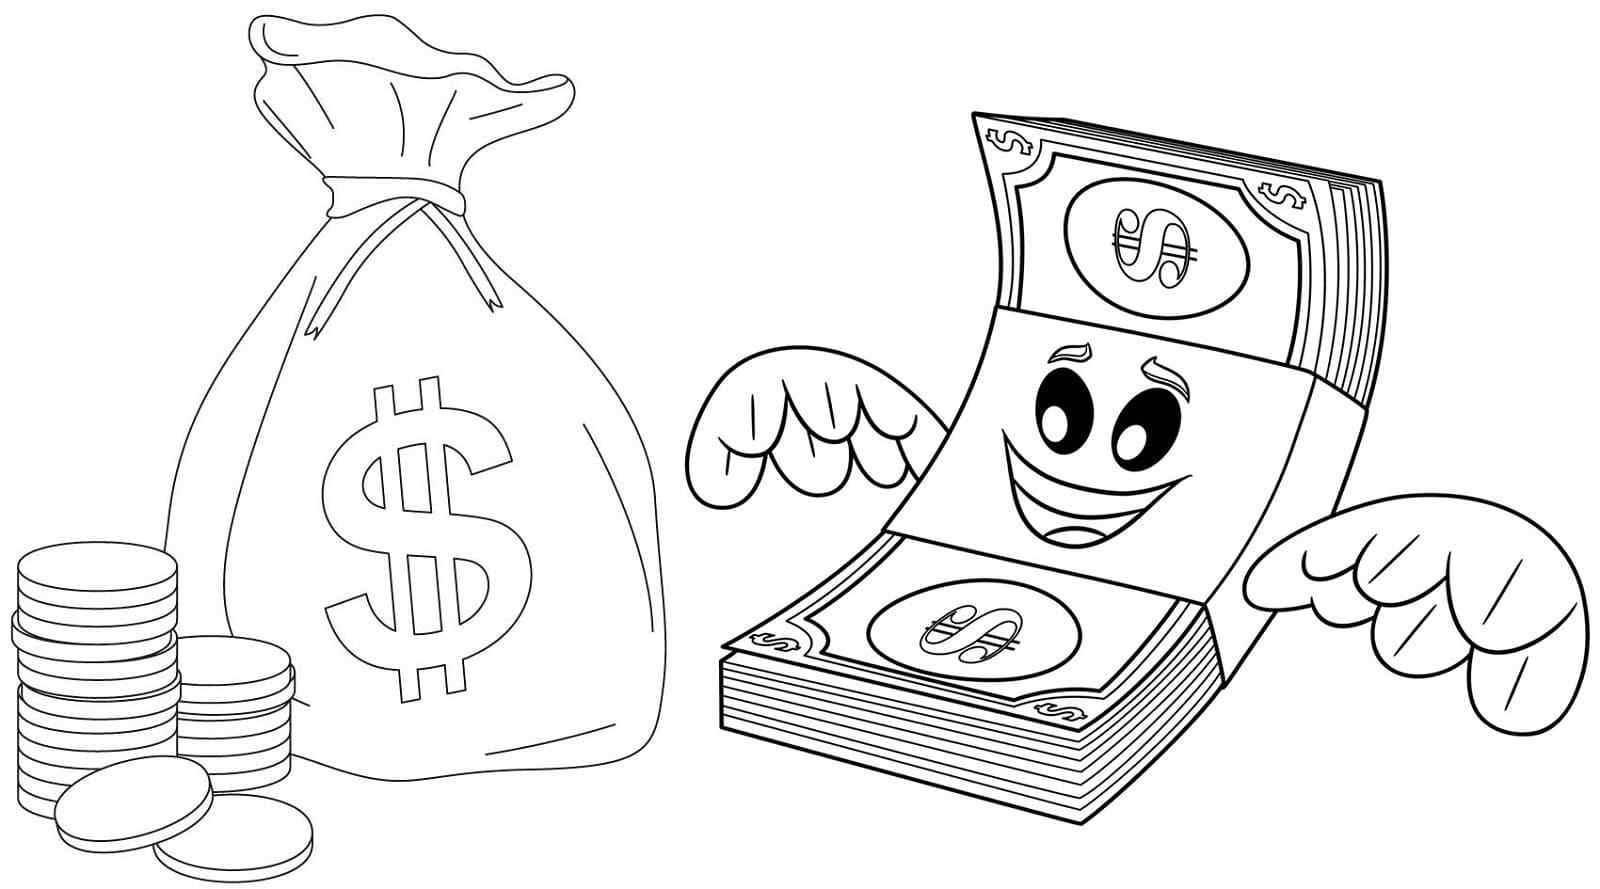 The Winged Wad Of Money